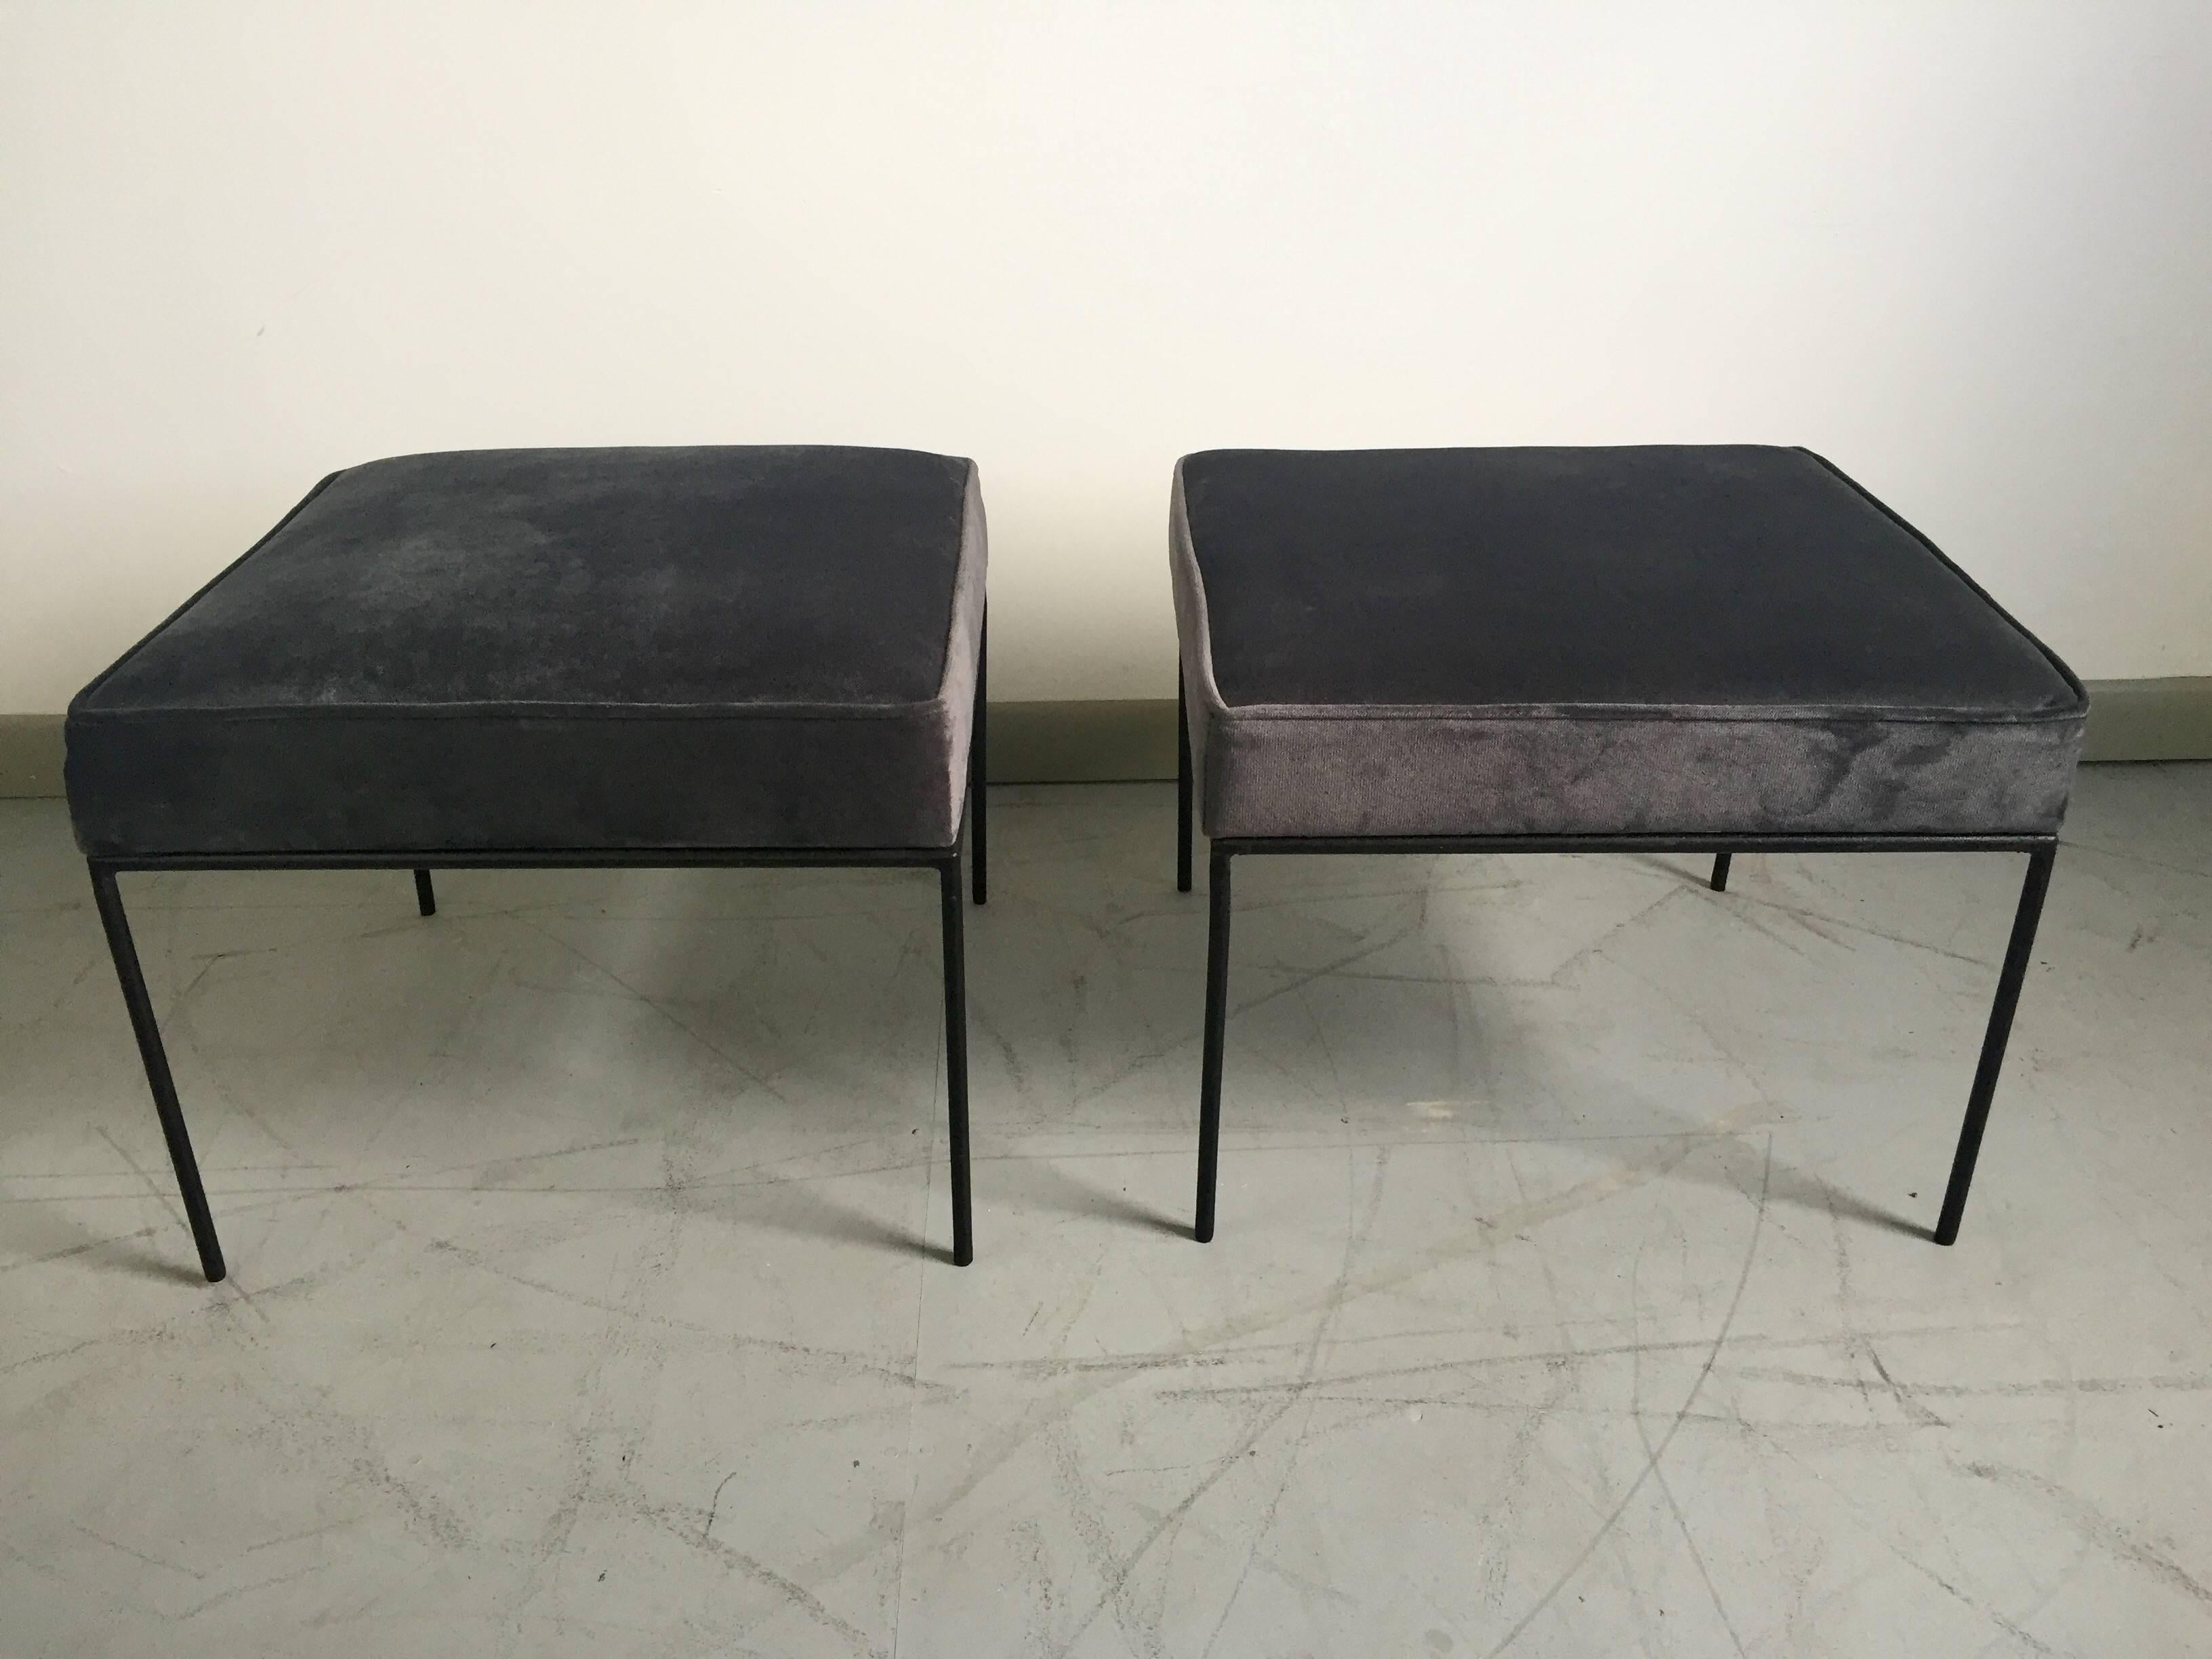 Classic square stools by Paul McCobb featuring iron bases and newly upholstered seats in a rich steel grey velvet.